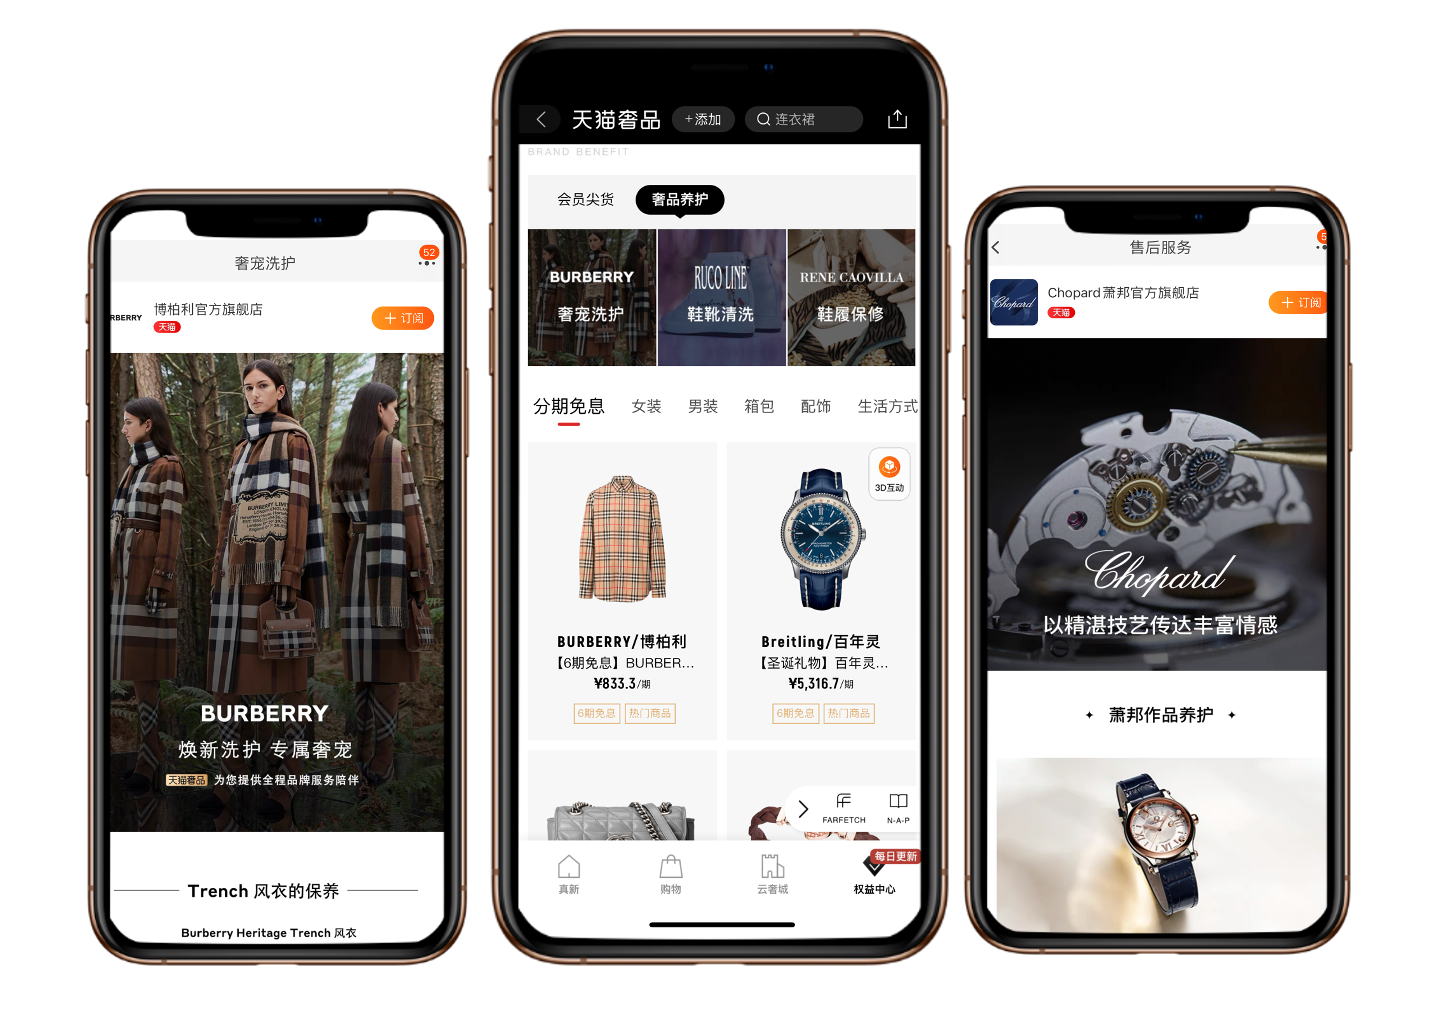 Cross border e-commerce logistics provides free door-to-door pick-up and care, while Burberry, GUCCI, and others have launched official after-sales services on Tmall